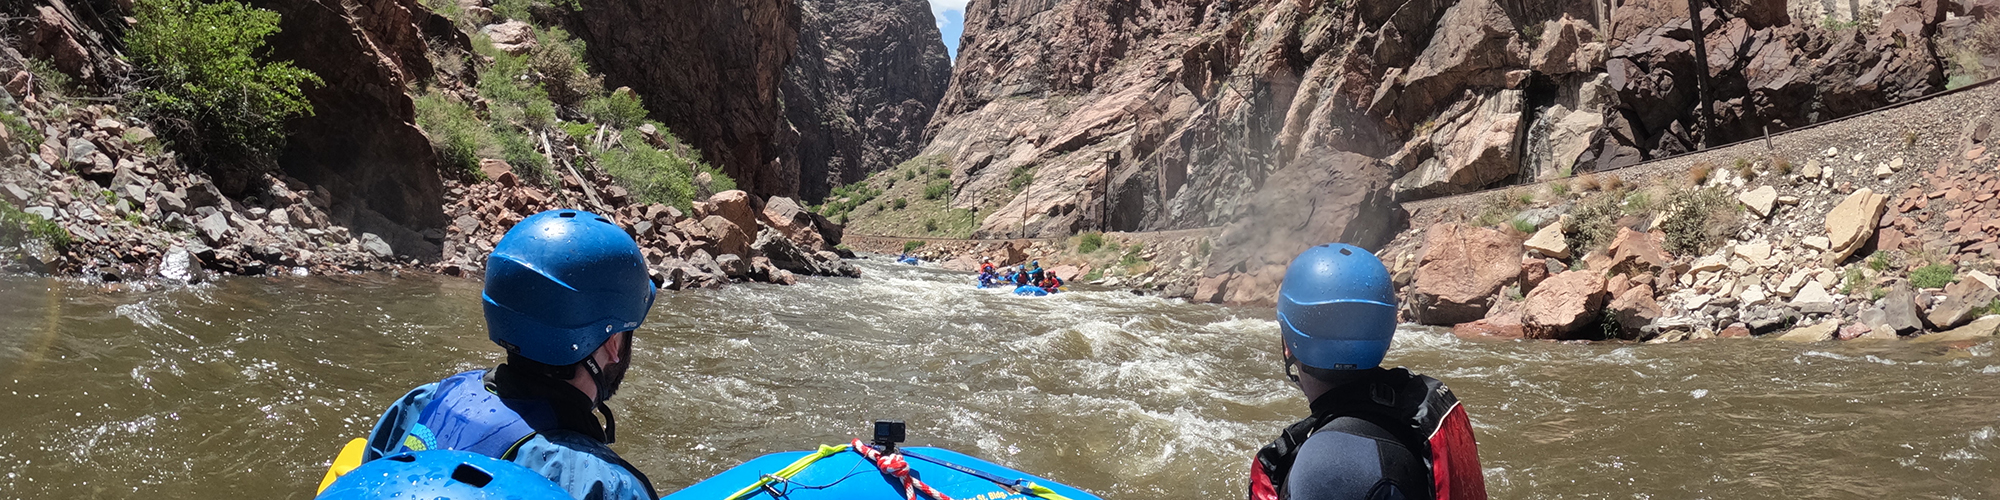 Whitewater rafting with Peterson SFB Outdoor Rec